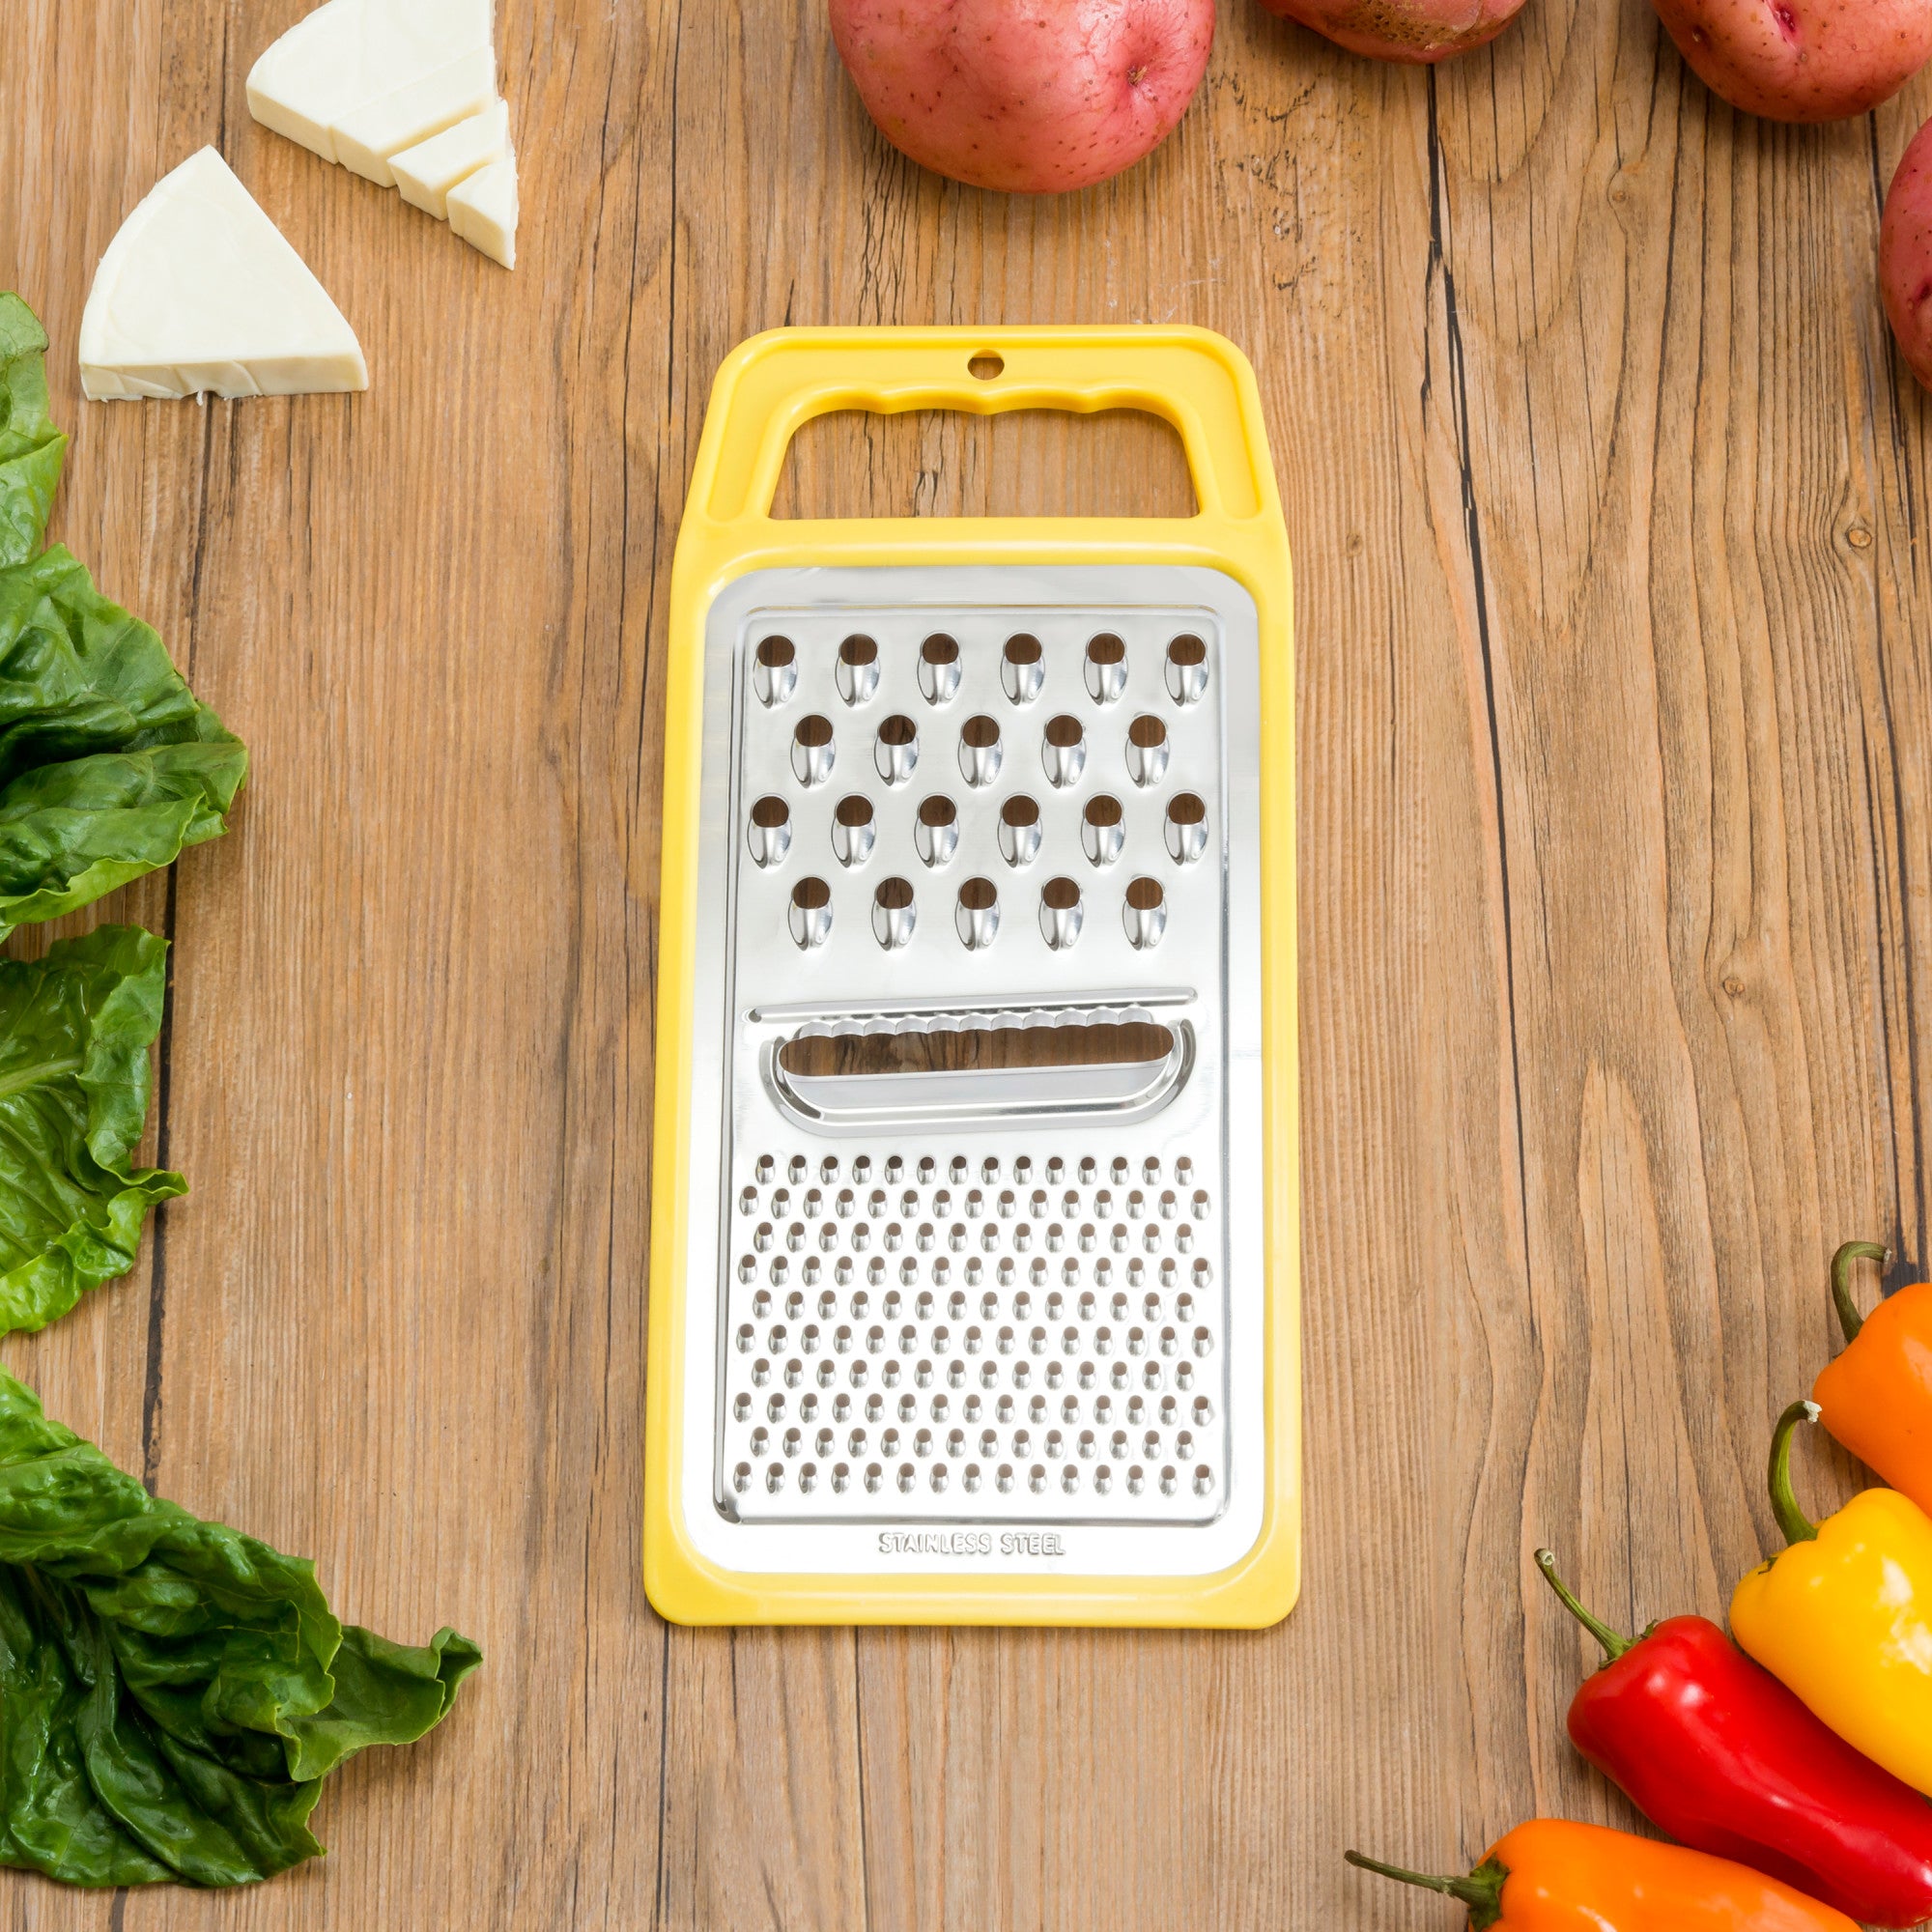 Home Basics 3-Way Flat Cheese Grater - Assorted Colors